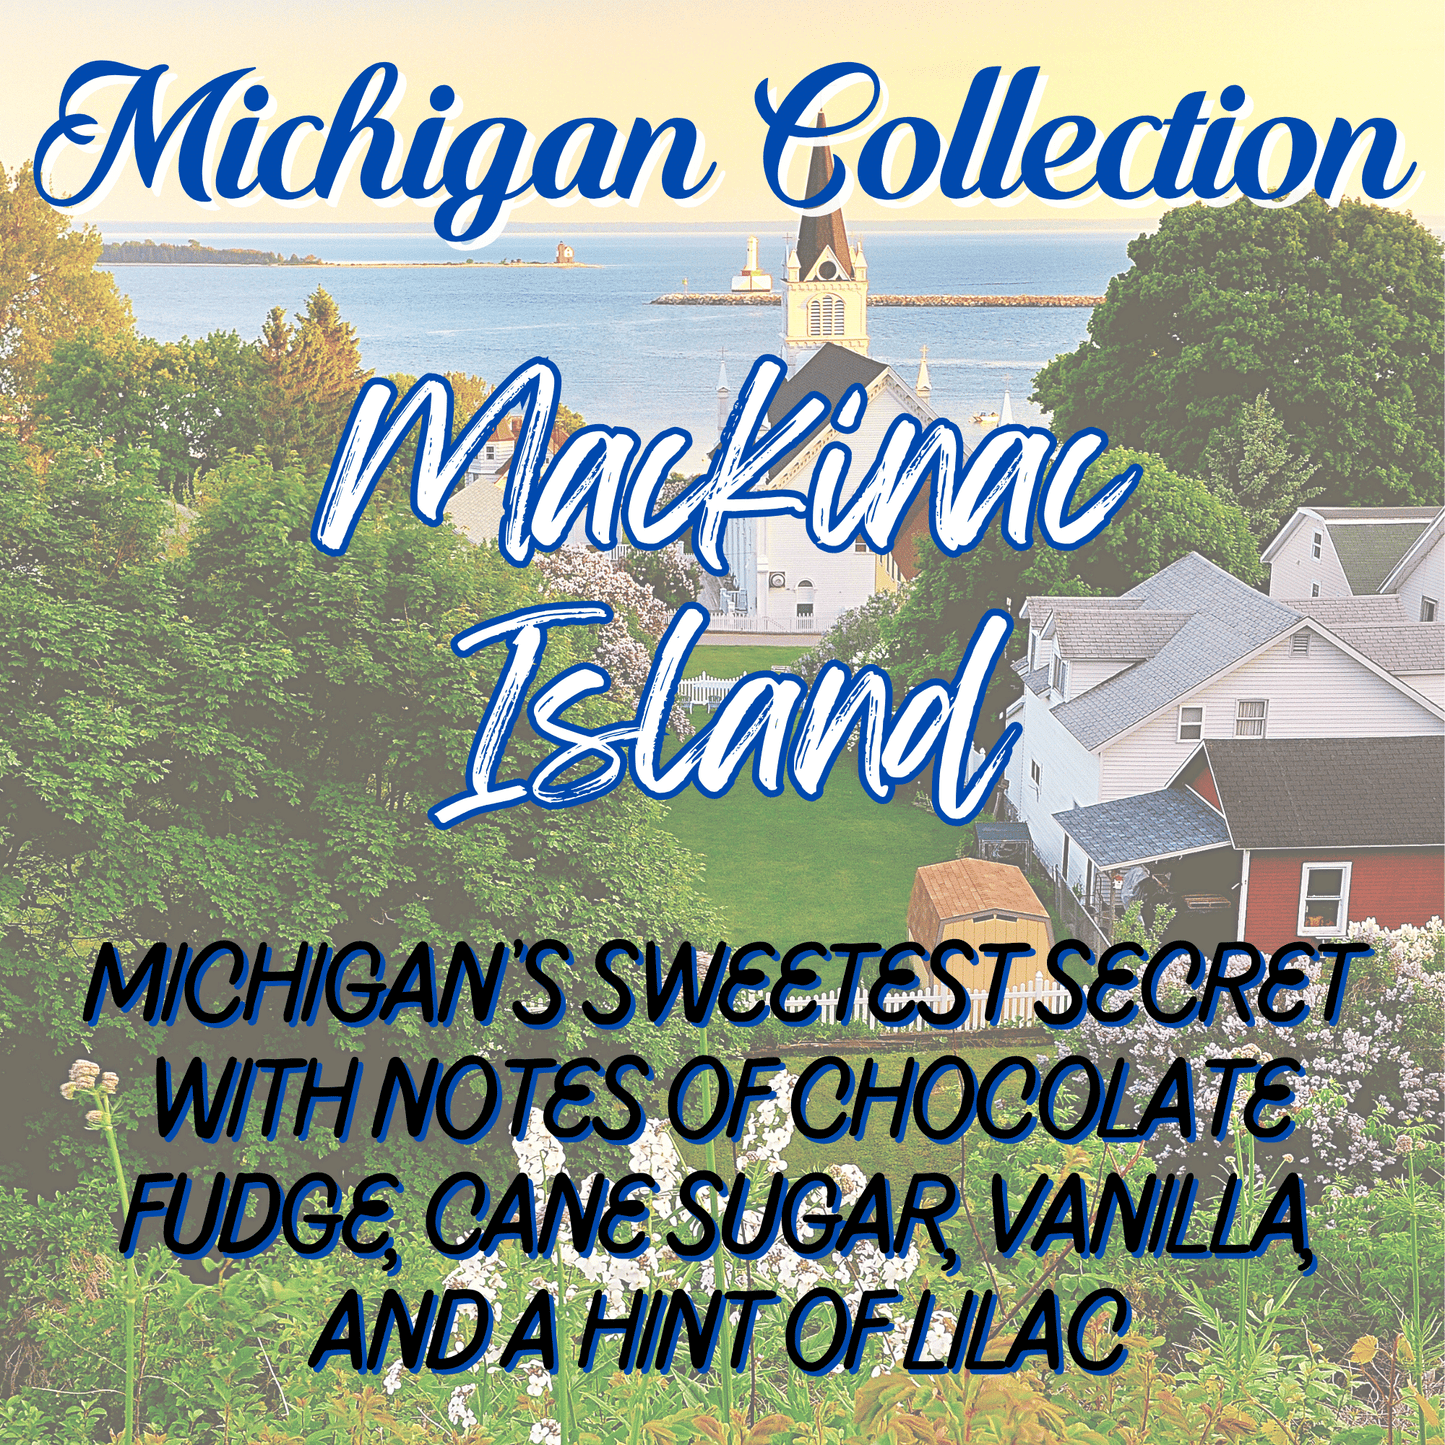 Michigan Whipped Body Butter | Mackinac Island Inspired Scent | Choice of Size